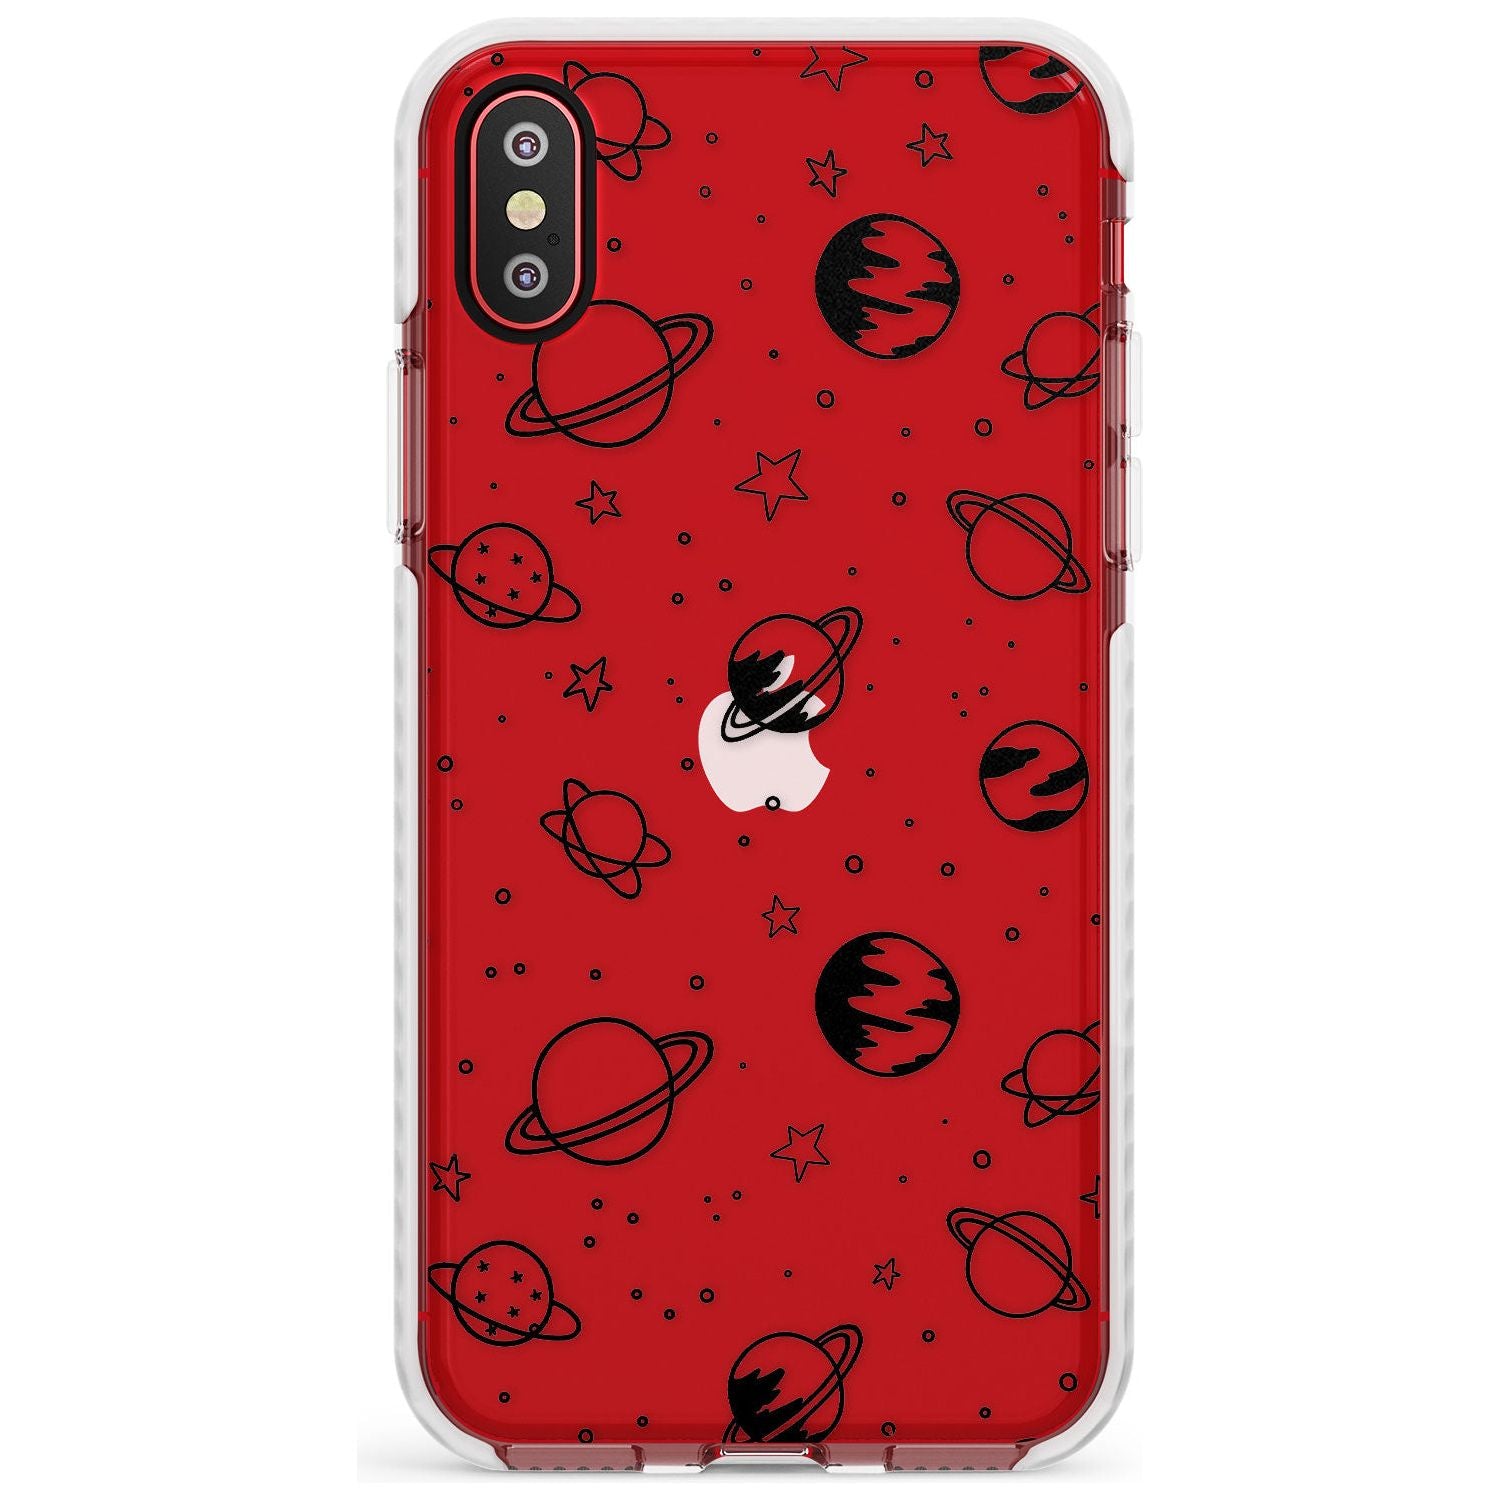 Outer Space Outlines: Black on Clear Slim TPU Phone Case Warehouse X XS Max XR